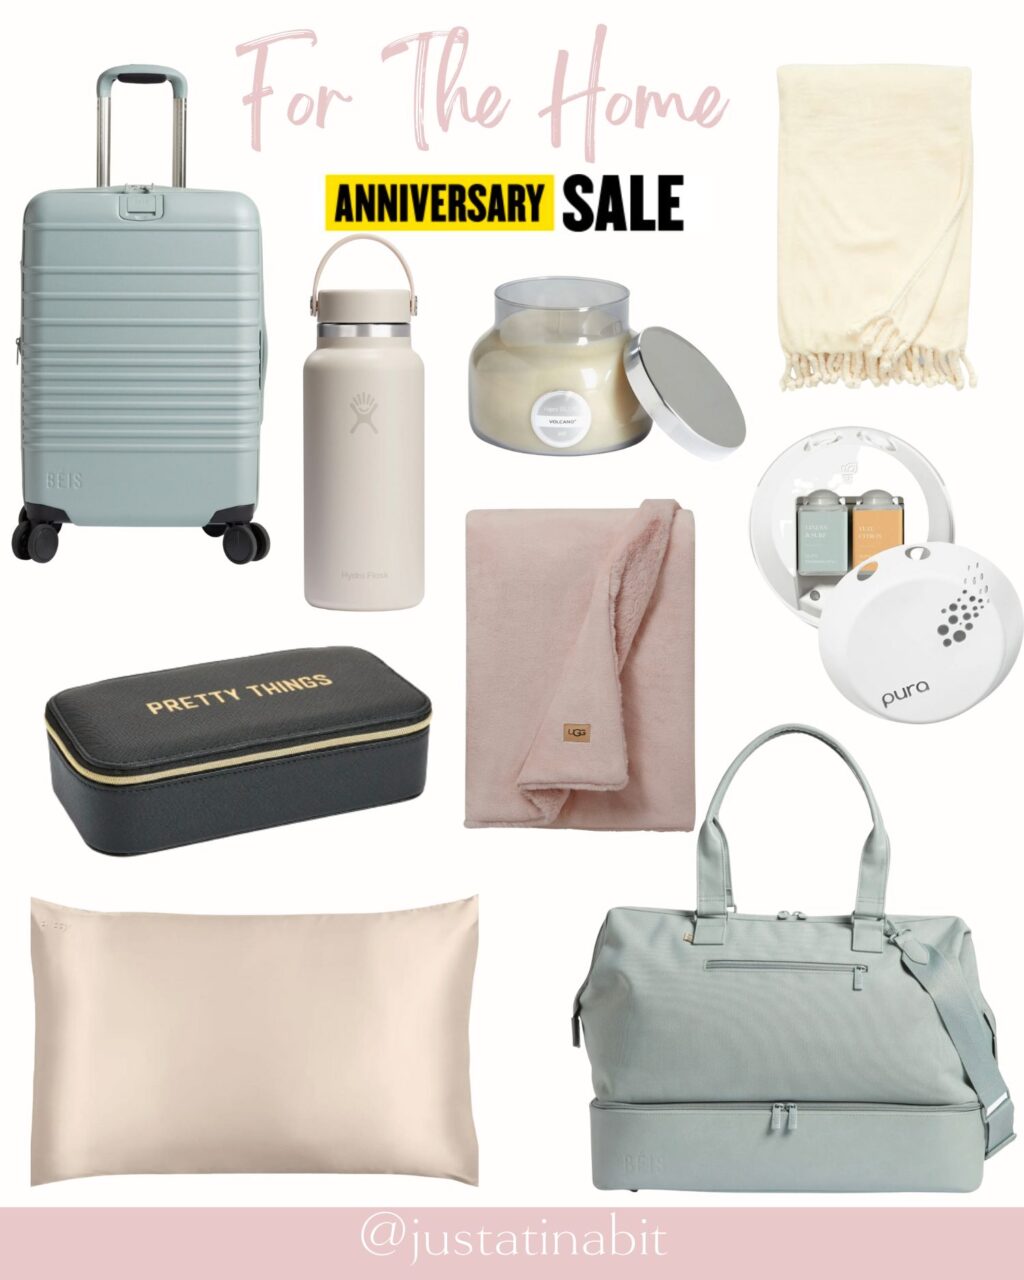 nordstrom anniversary sale 2023 for the home sale favorites, Beis luggage, cozy throw, pura smart diffuser, silk pillow